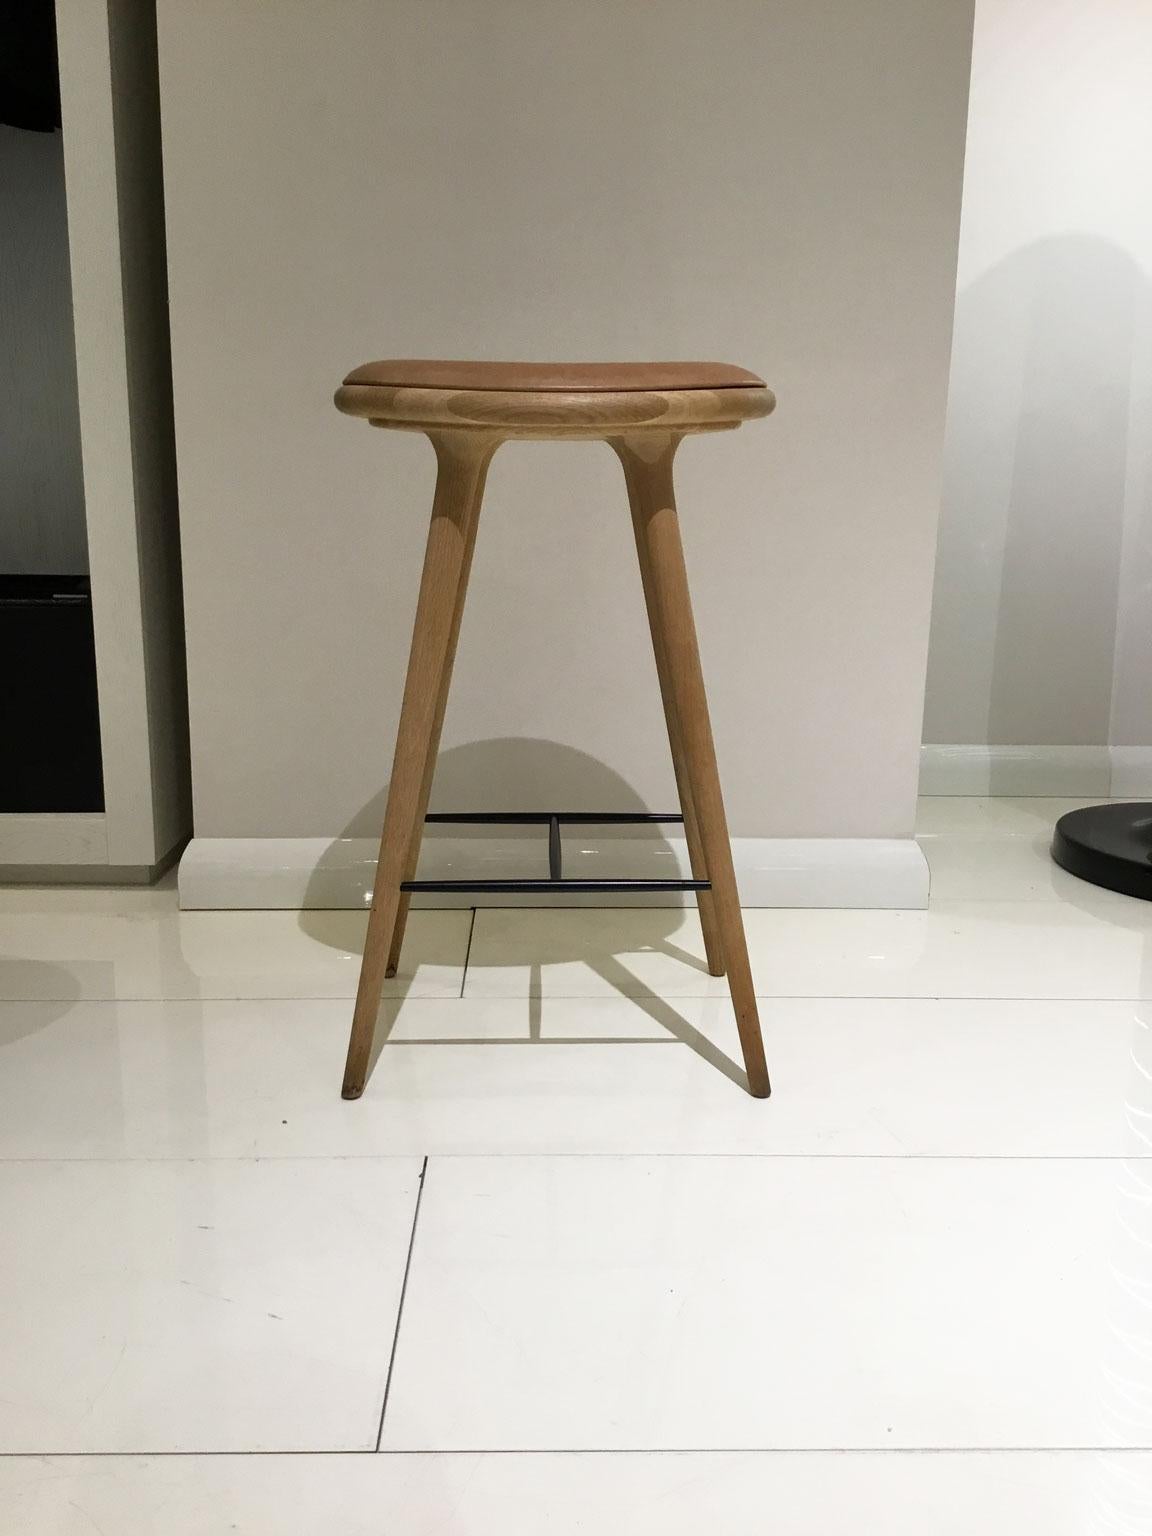 The Mater High stool is designed by the Danish architect duo Space Copenhagen and is regarded as a New Danish Classic. With its organic yet Minimalist style, this bar stool is suitable for both residential and commercial use. 

Design
Space